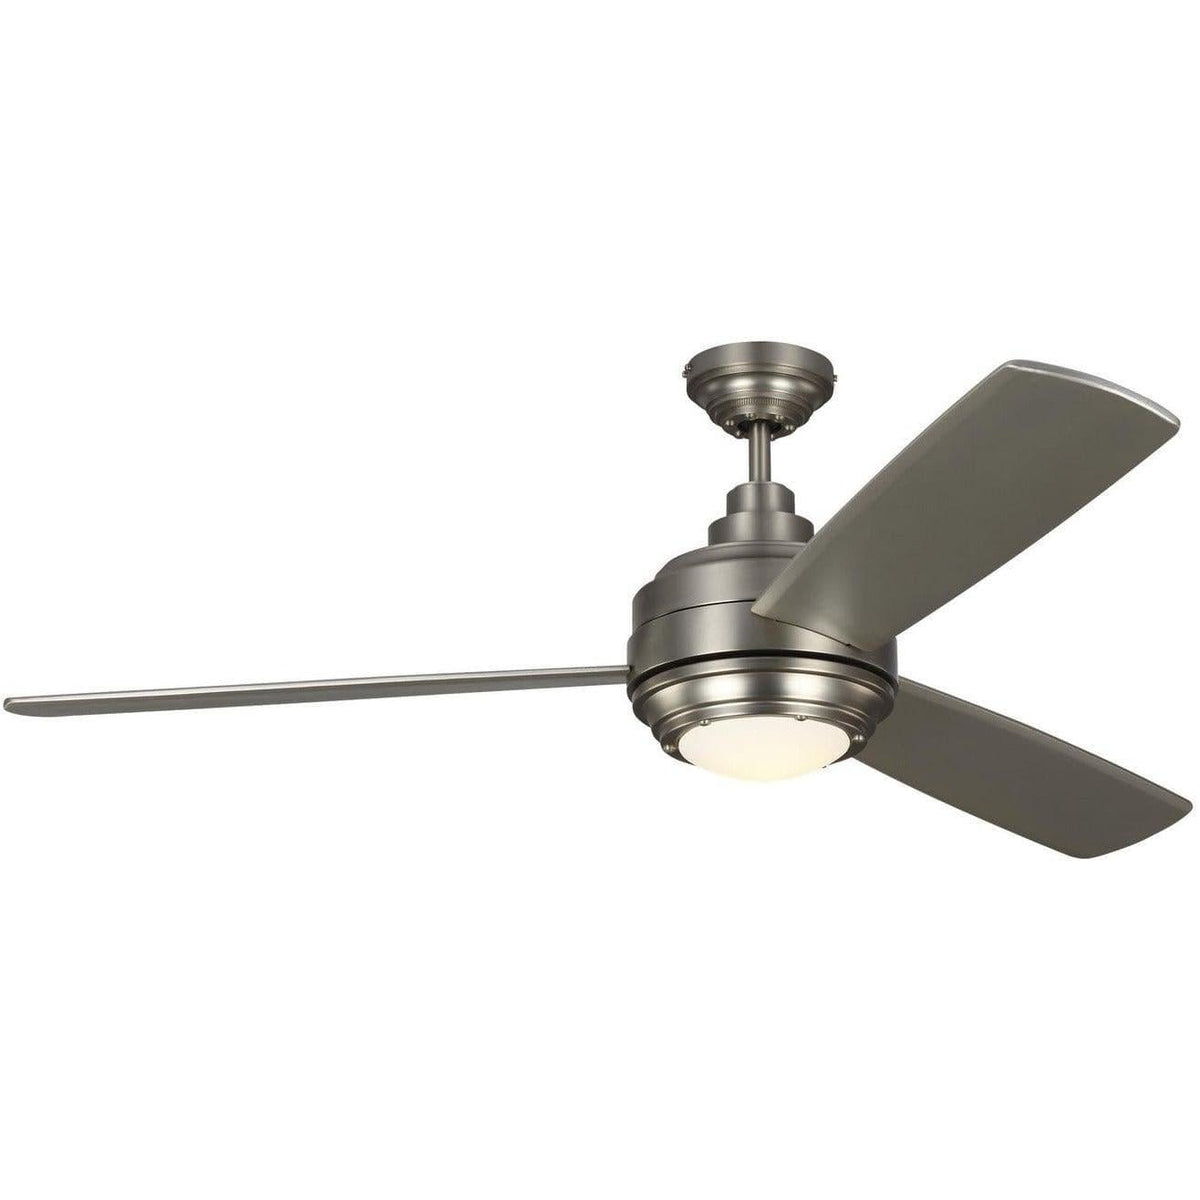 Visual Comfort Fan Collection - Aerotour 56" Ceiling Fan - 3TAR56SND | Montreal Lighting & Hardware